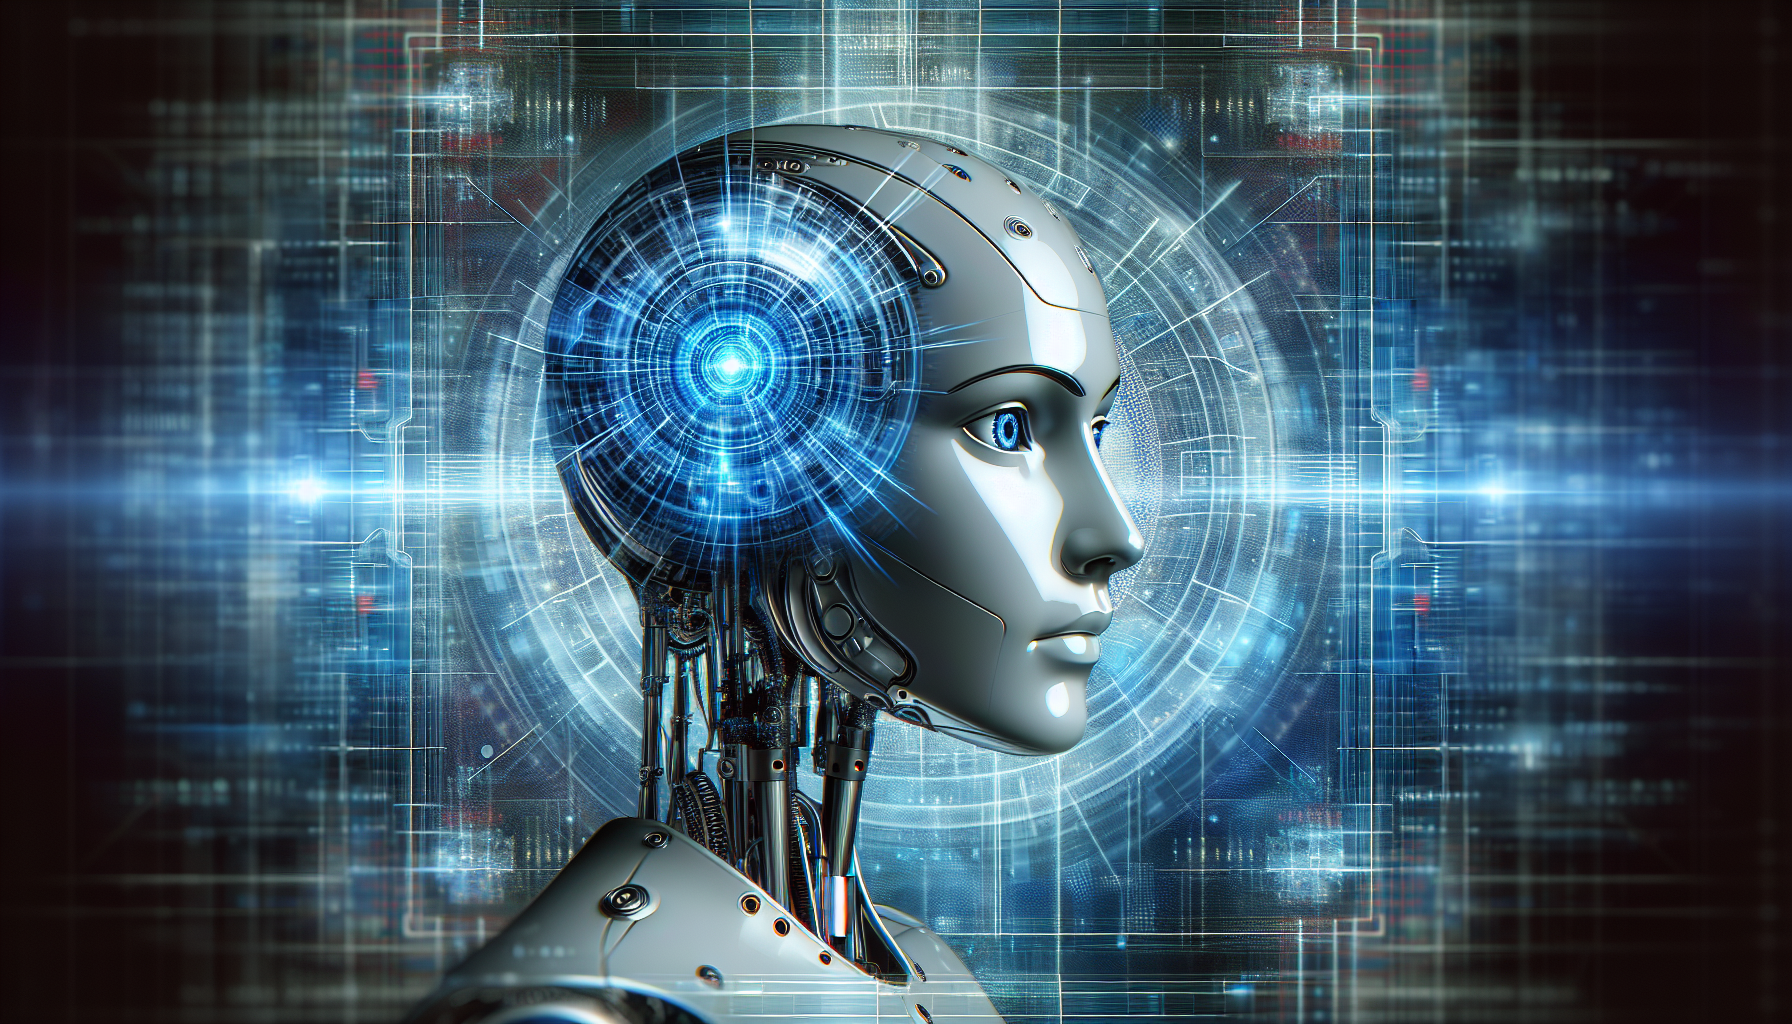 What Are The Key Components Of A Sentient Virtual Assistant Or Self-aware AI System?